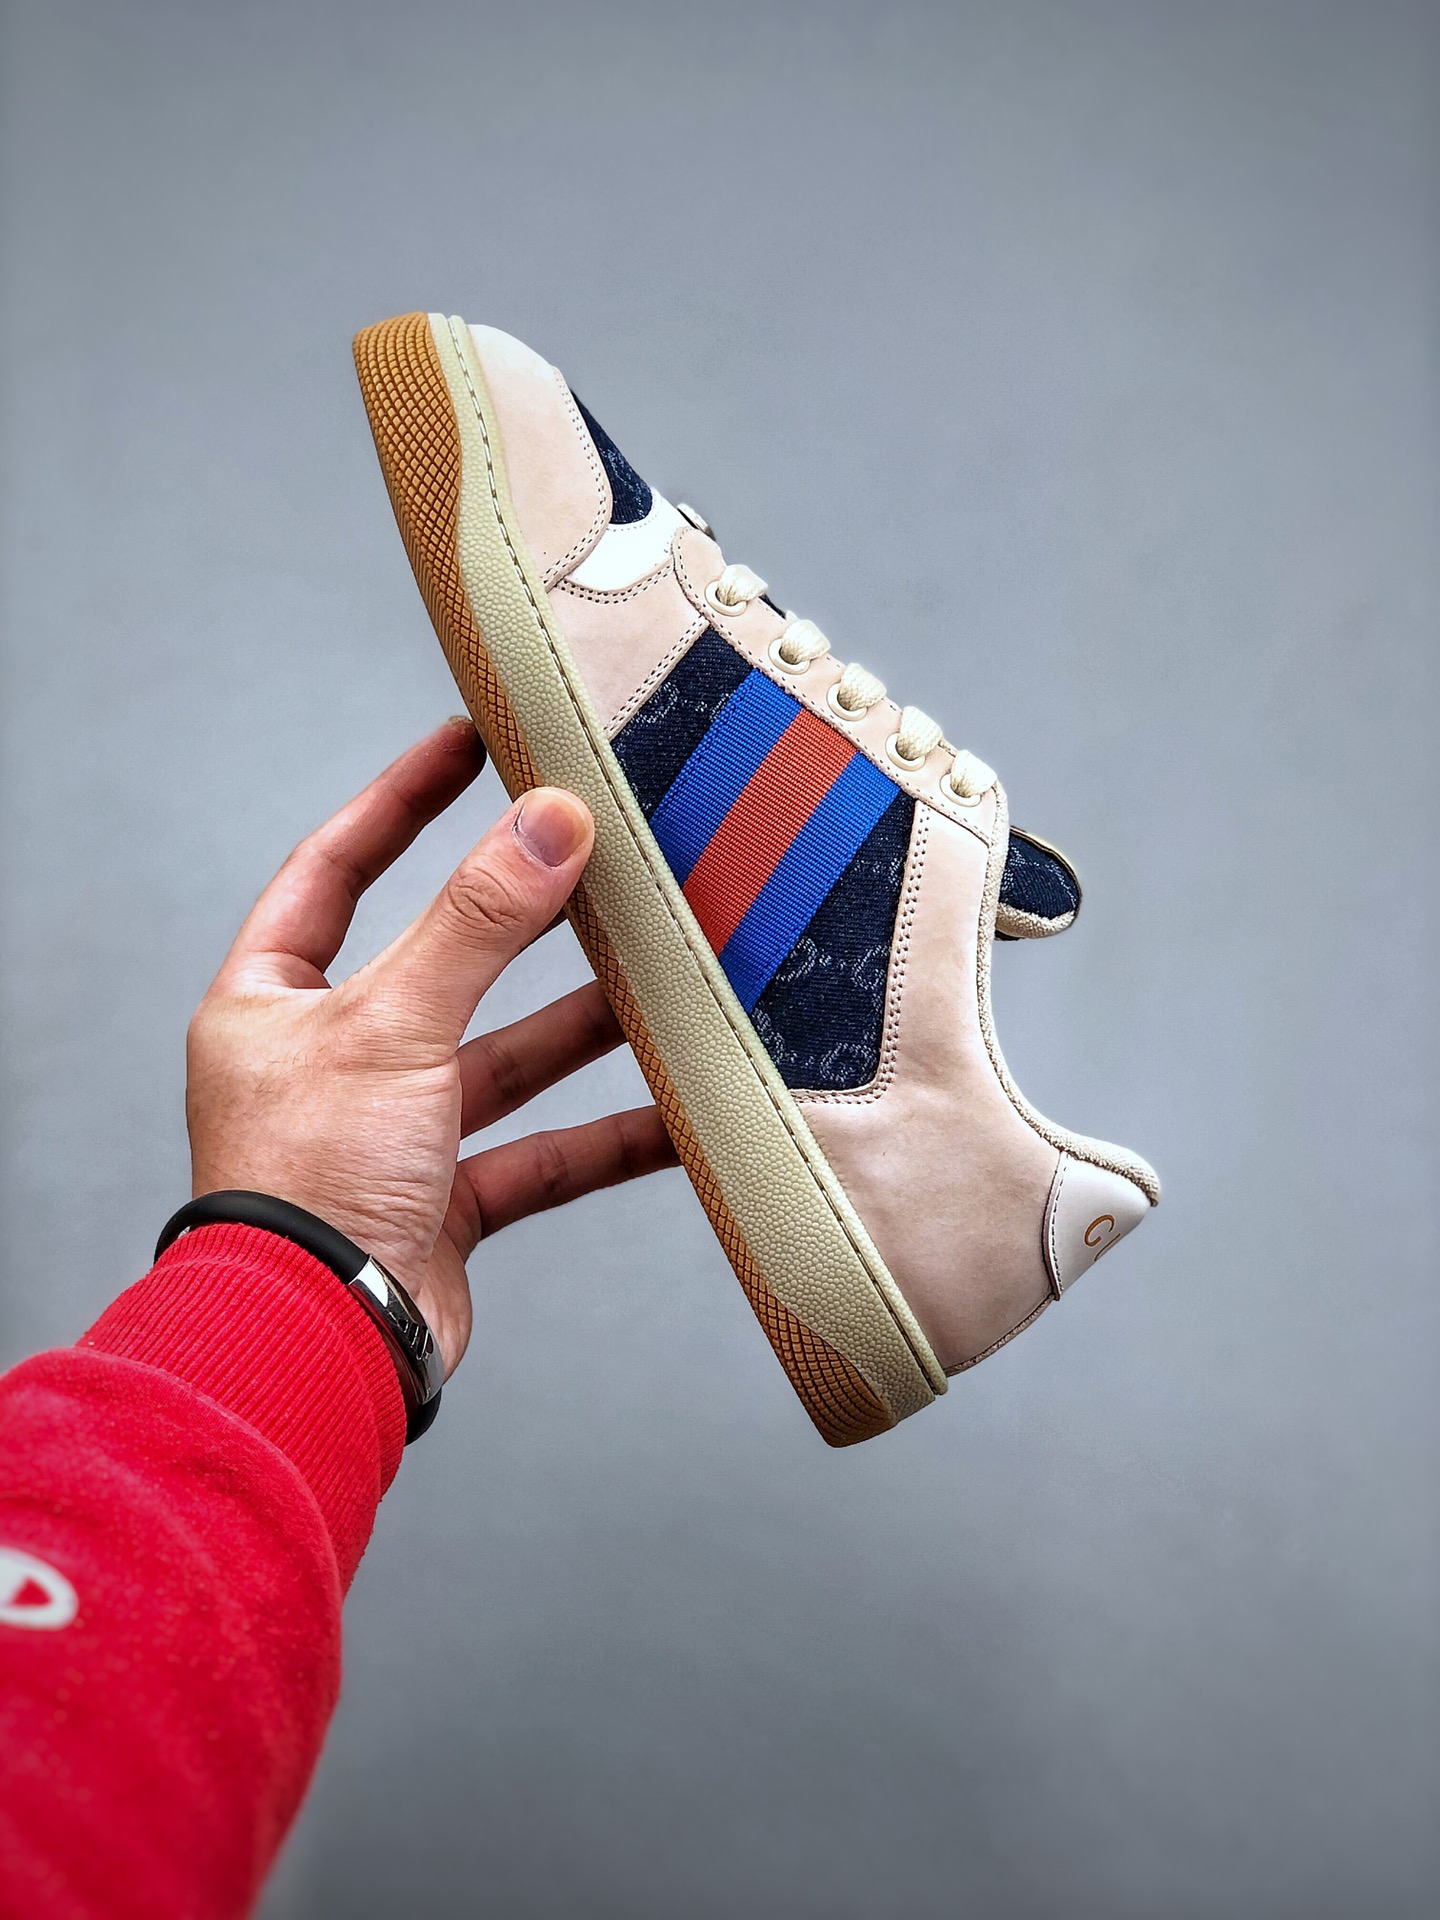 Pure original level, no copywriting routines, quality speak #New color matching Gucci Distressed Screener sneaker small dirty shoes series